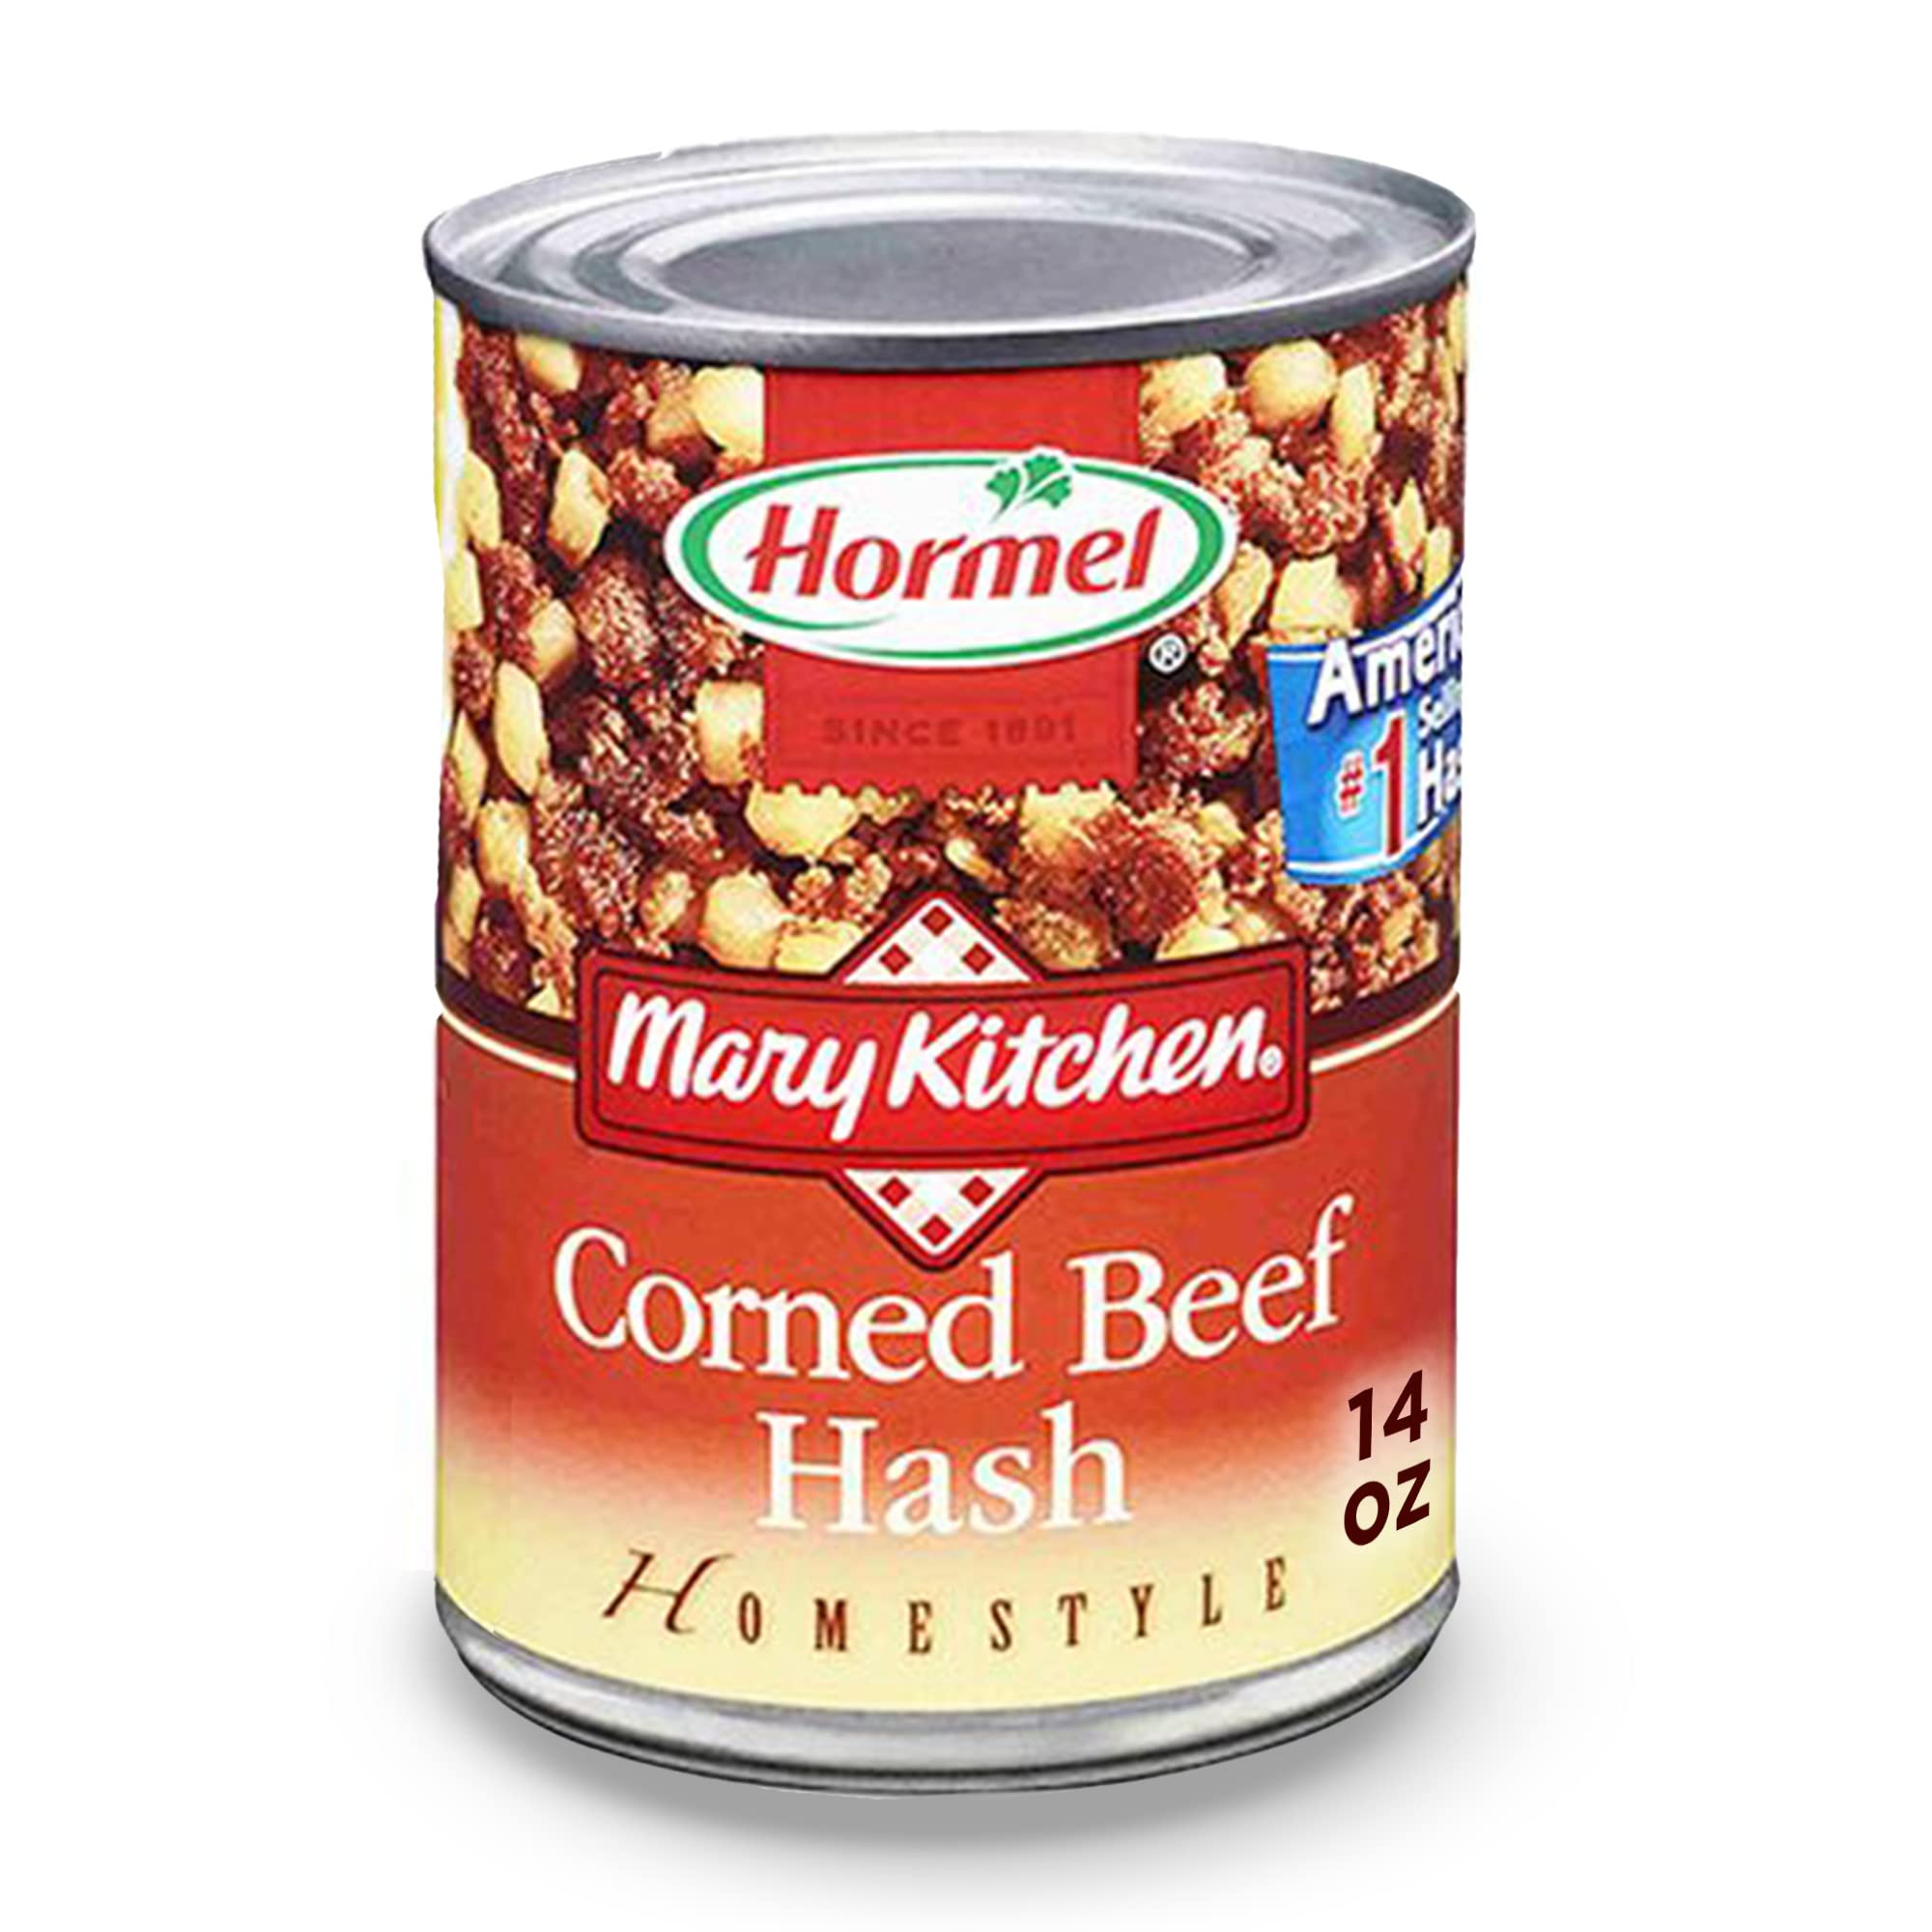 Mary Kitchen Corned Beef Hash Canned Corned Beef 14 Oz 8 Pack 